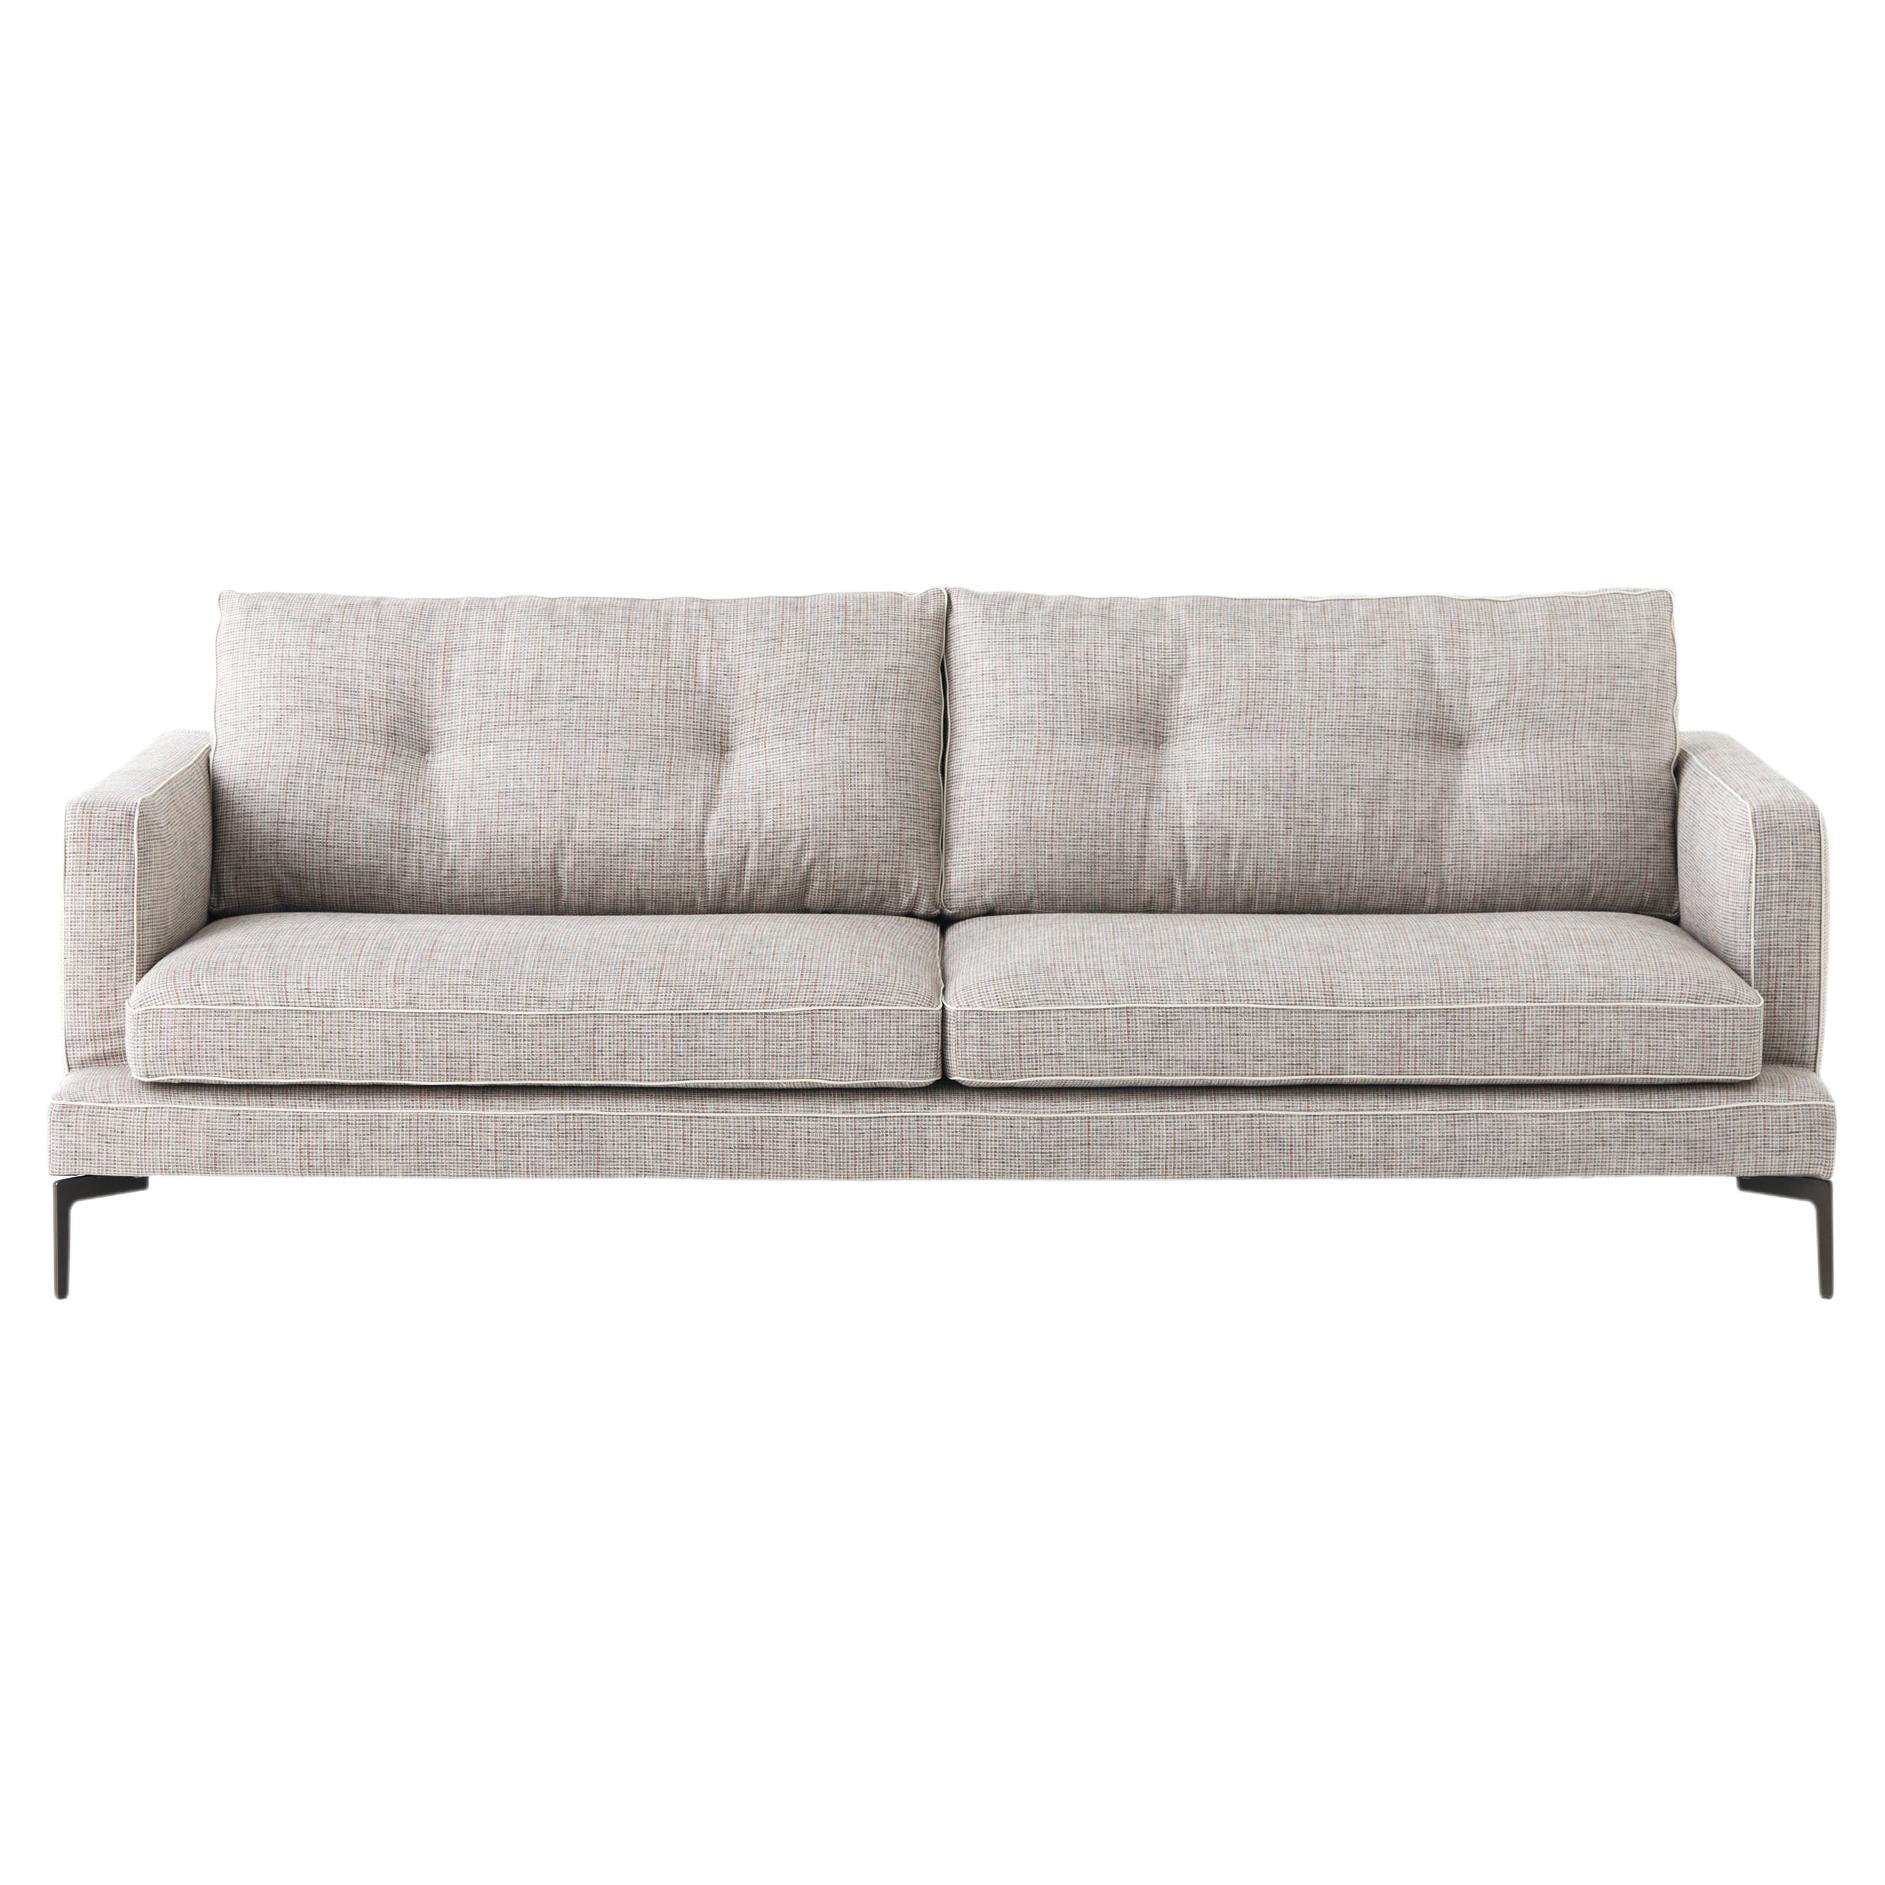 Essentiel 2-Seat 190 Sofa in Vip Beige Upholstery & Grey Legs by Sergio Bicego For Sale